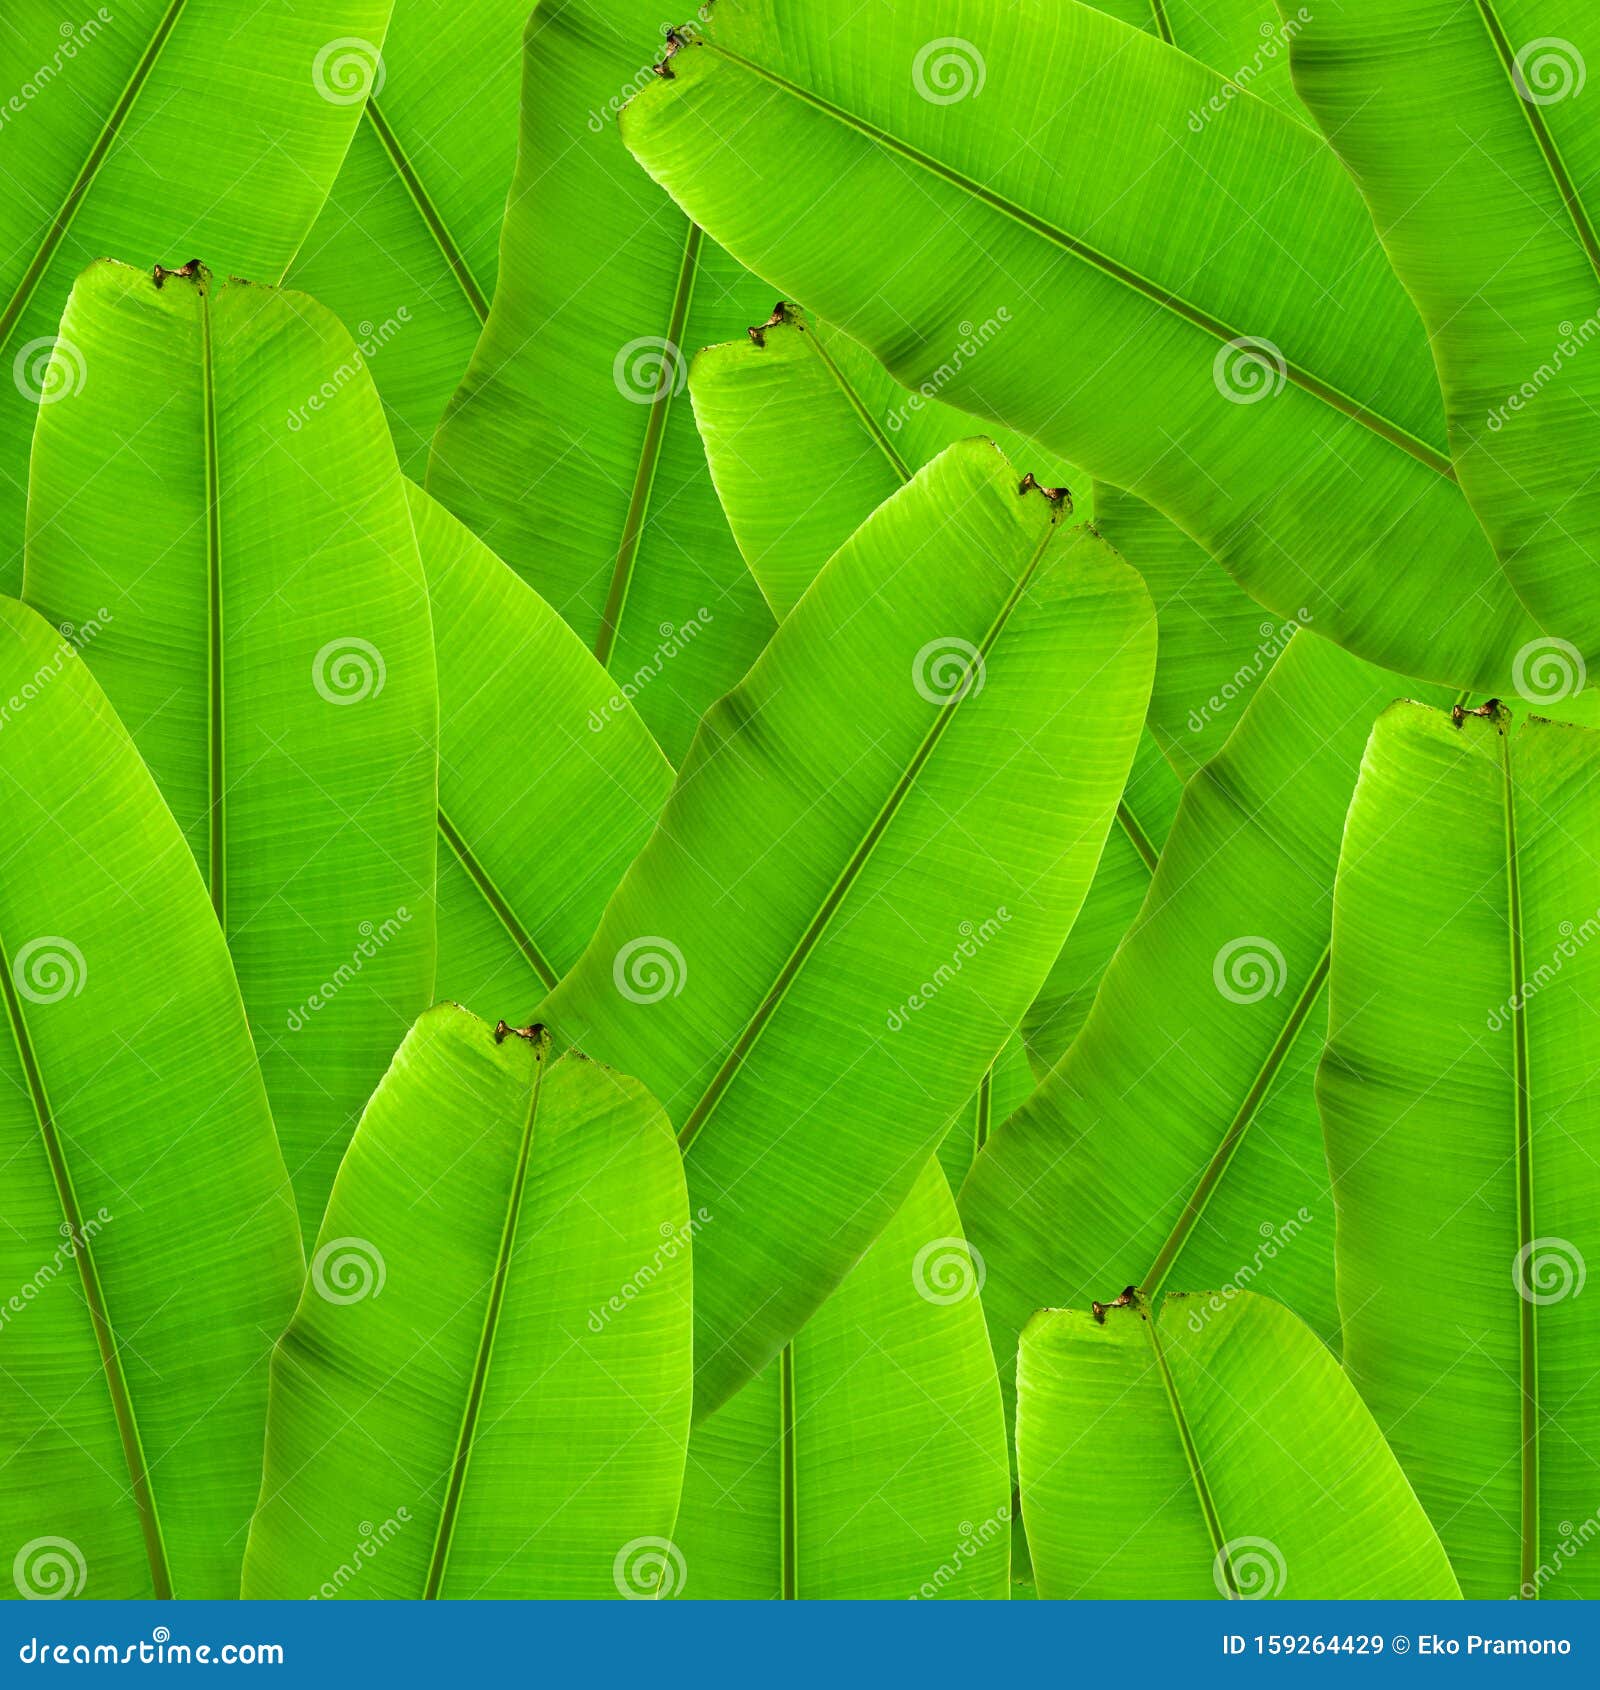 Banana Palm Tree Collection Isolated on a White  Leaves  and Banana Bunch for Graphic Design Stock Image - Image of beauty, exotic:  159264429